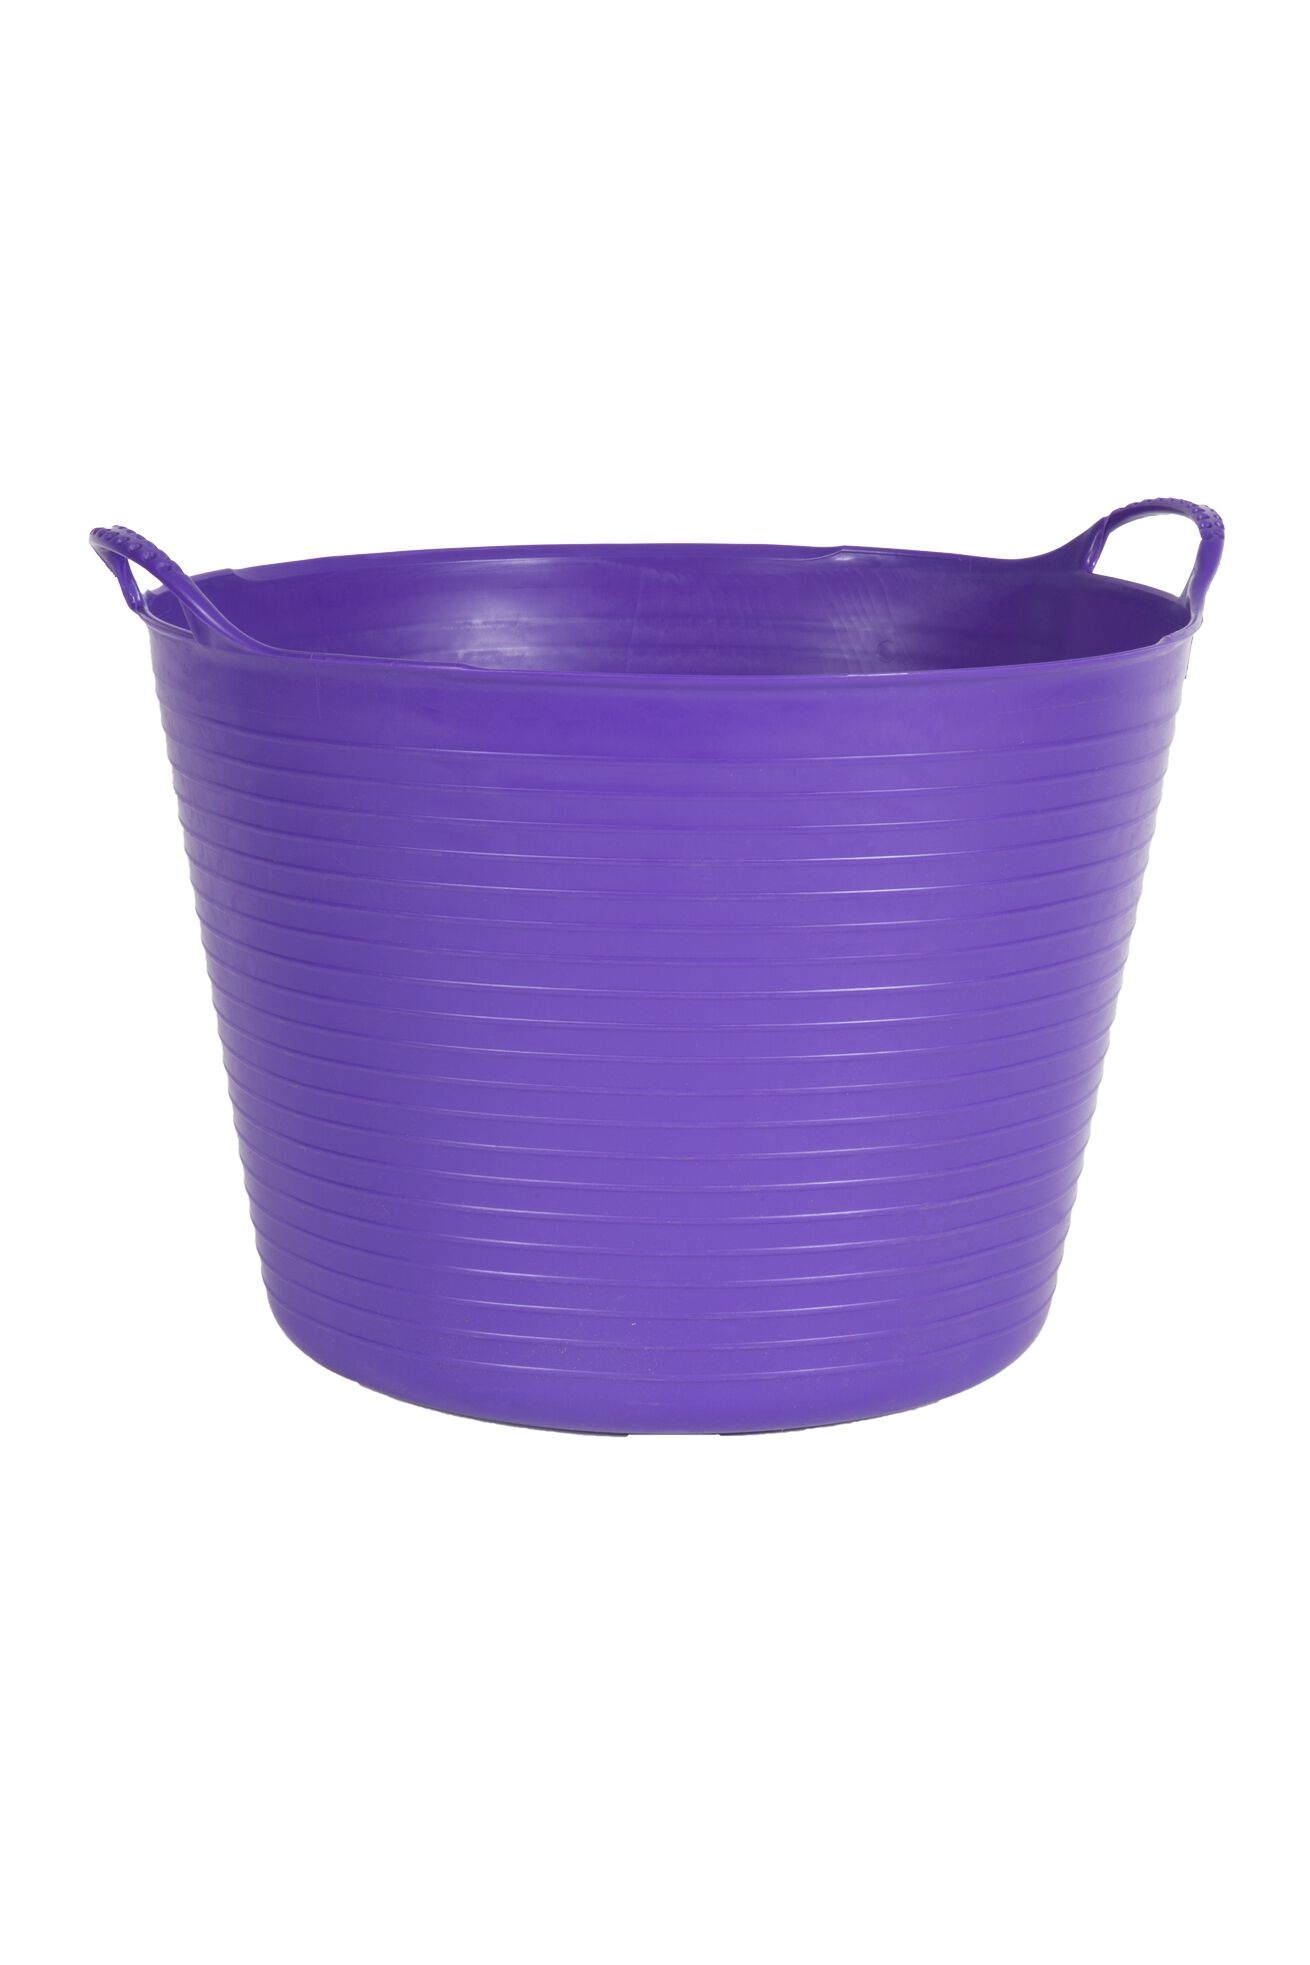 FLEXI GARDEN TUB LARGE PLASTIC BUCKET CONTAINER BUILDING MATERIAL HOLDER LAUNDRY 